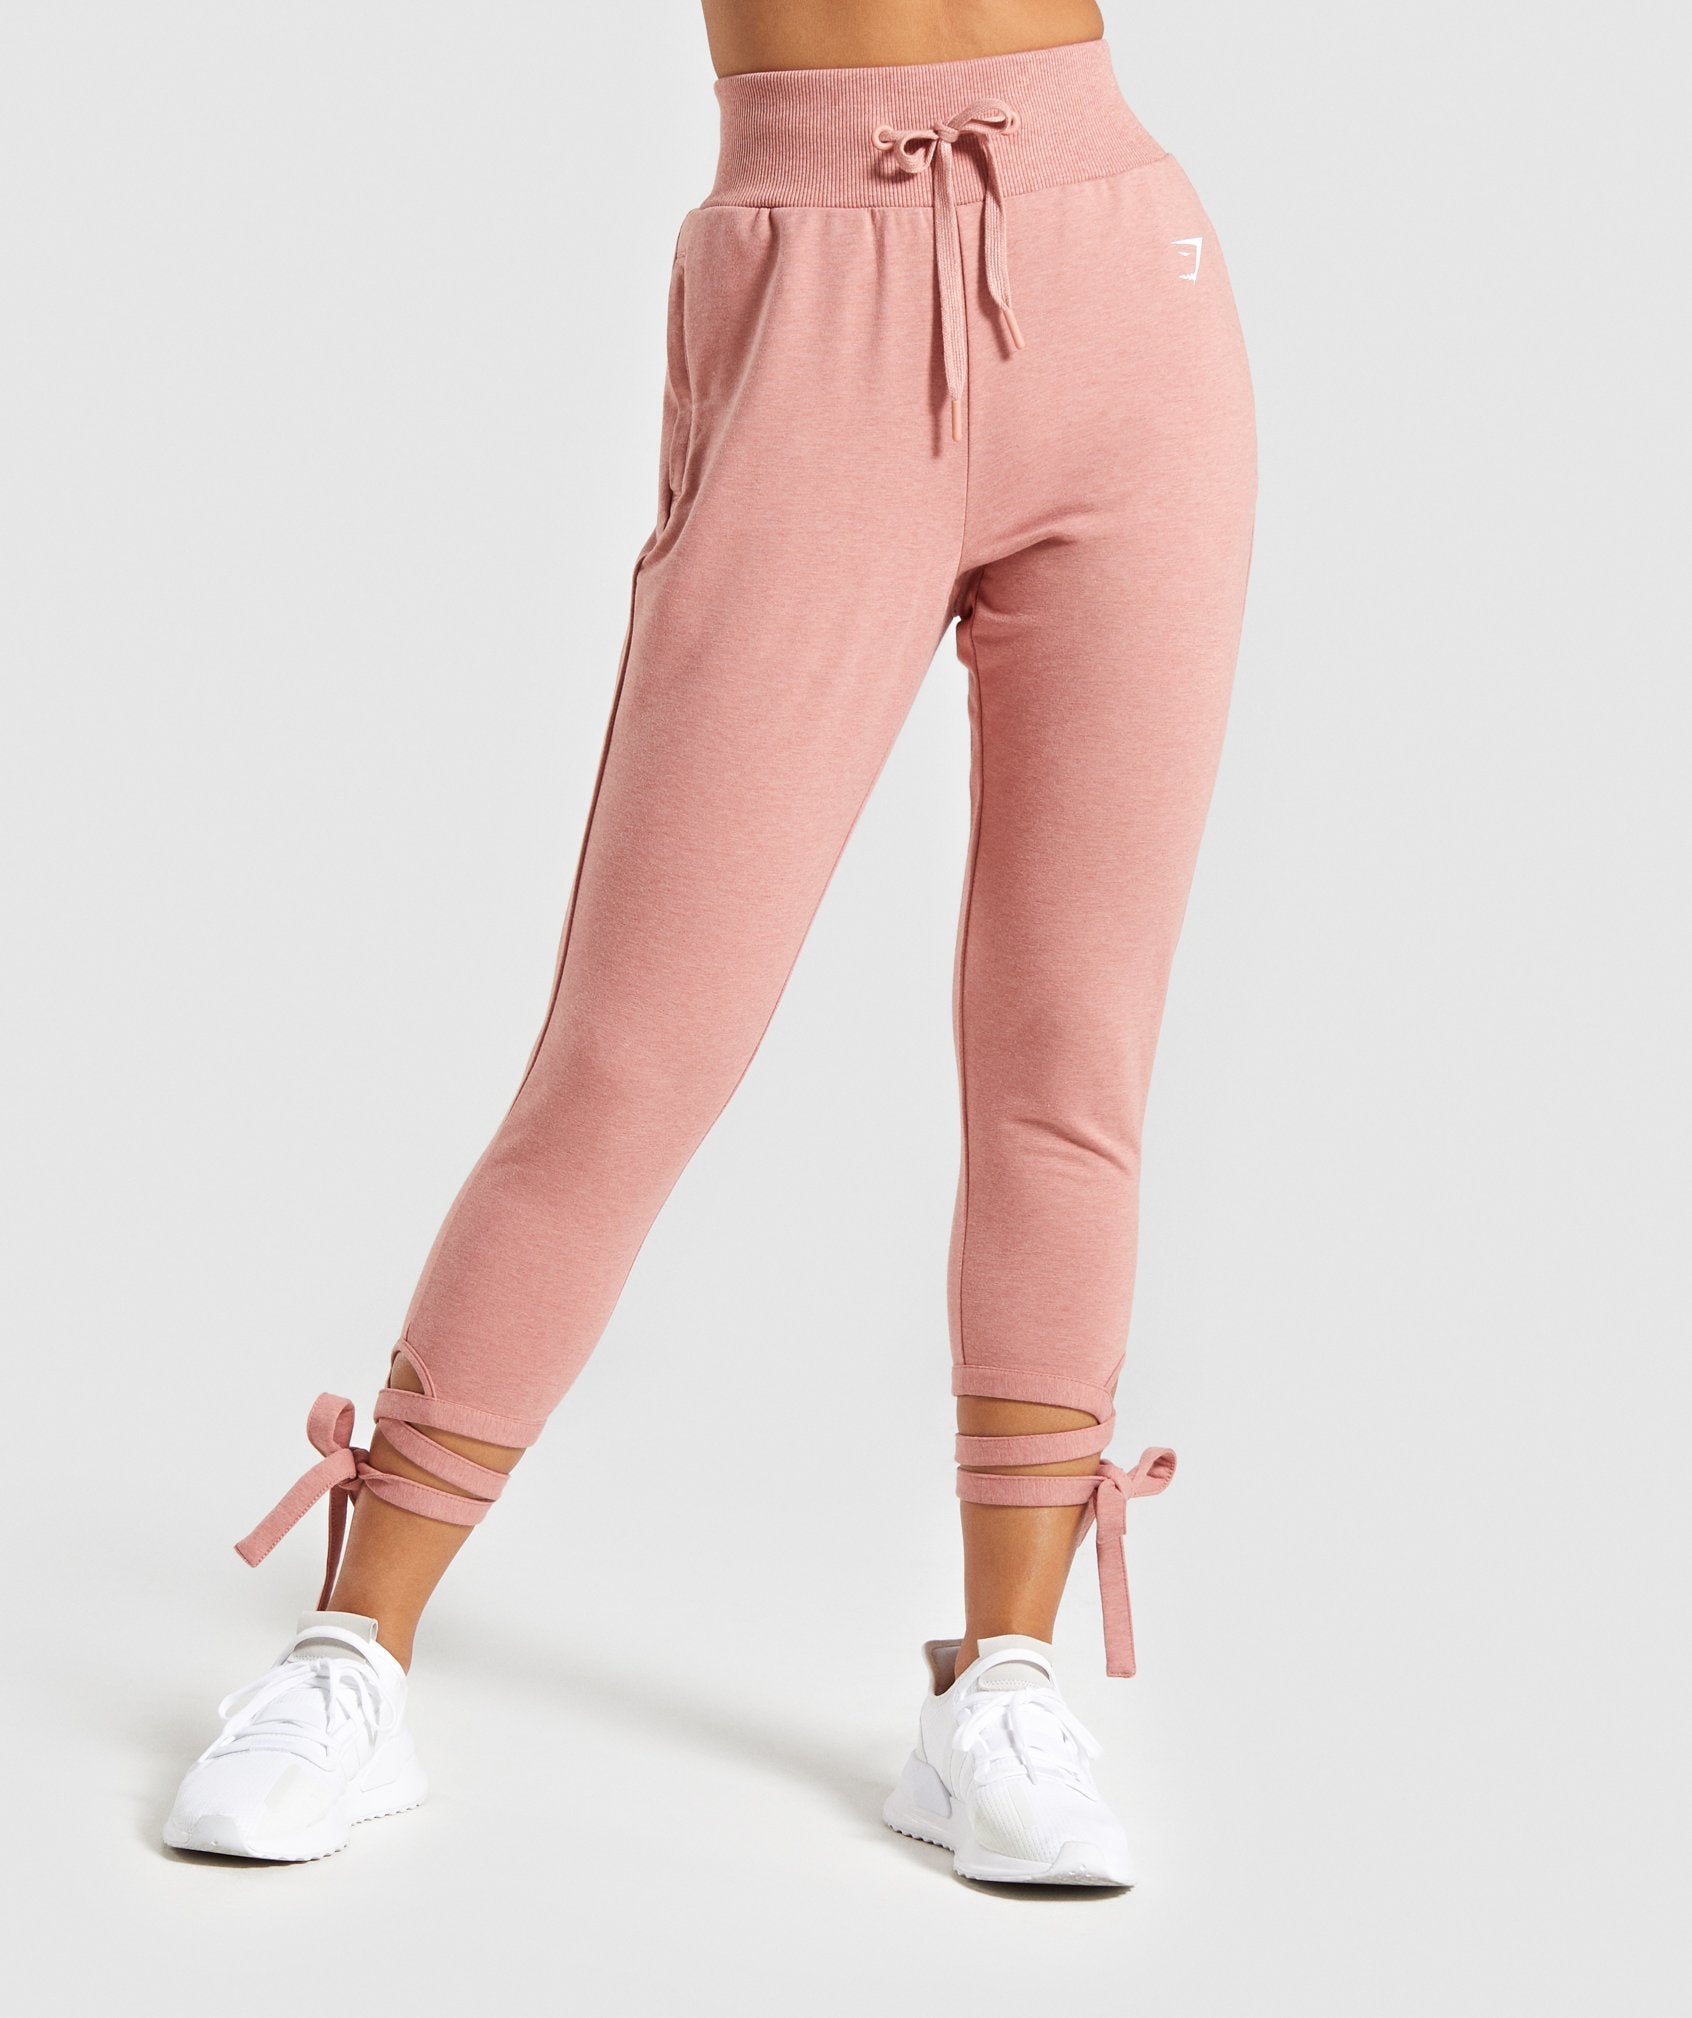 Ark High Waisted Joggers in Pink - view 1